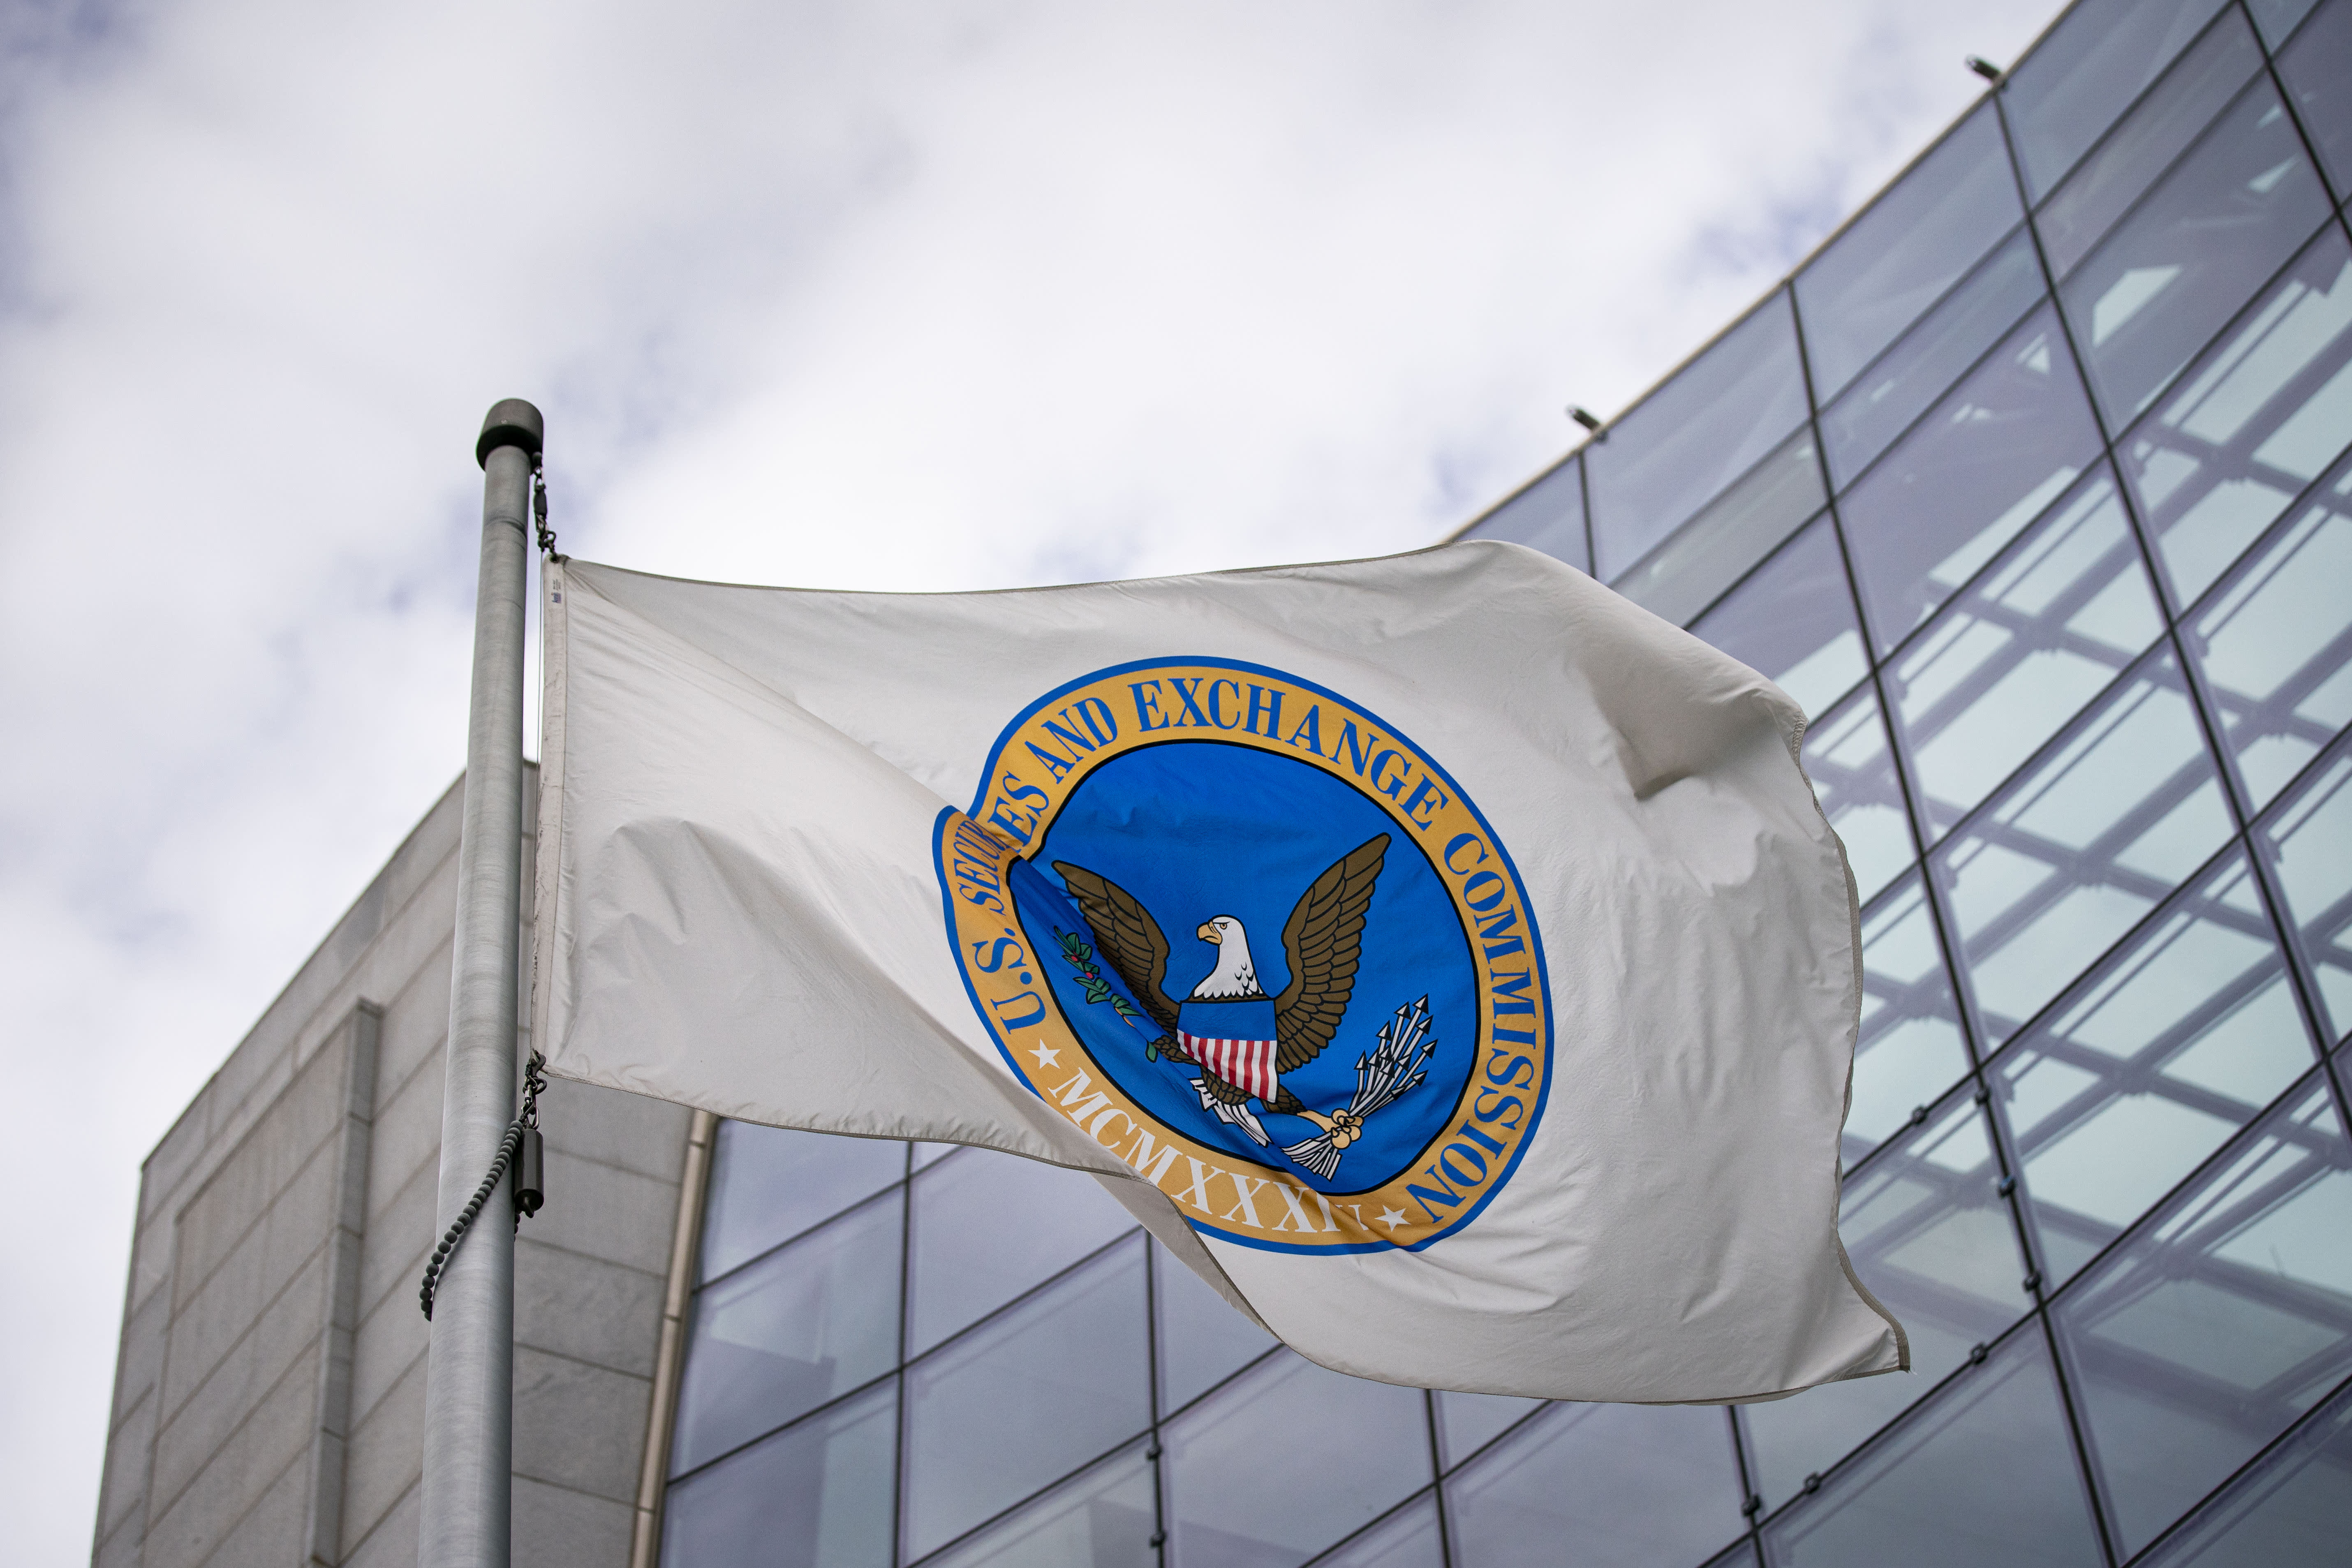 The SEC's Rulemaking Agenda and Its Impact on Investment Advisors